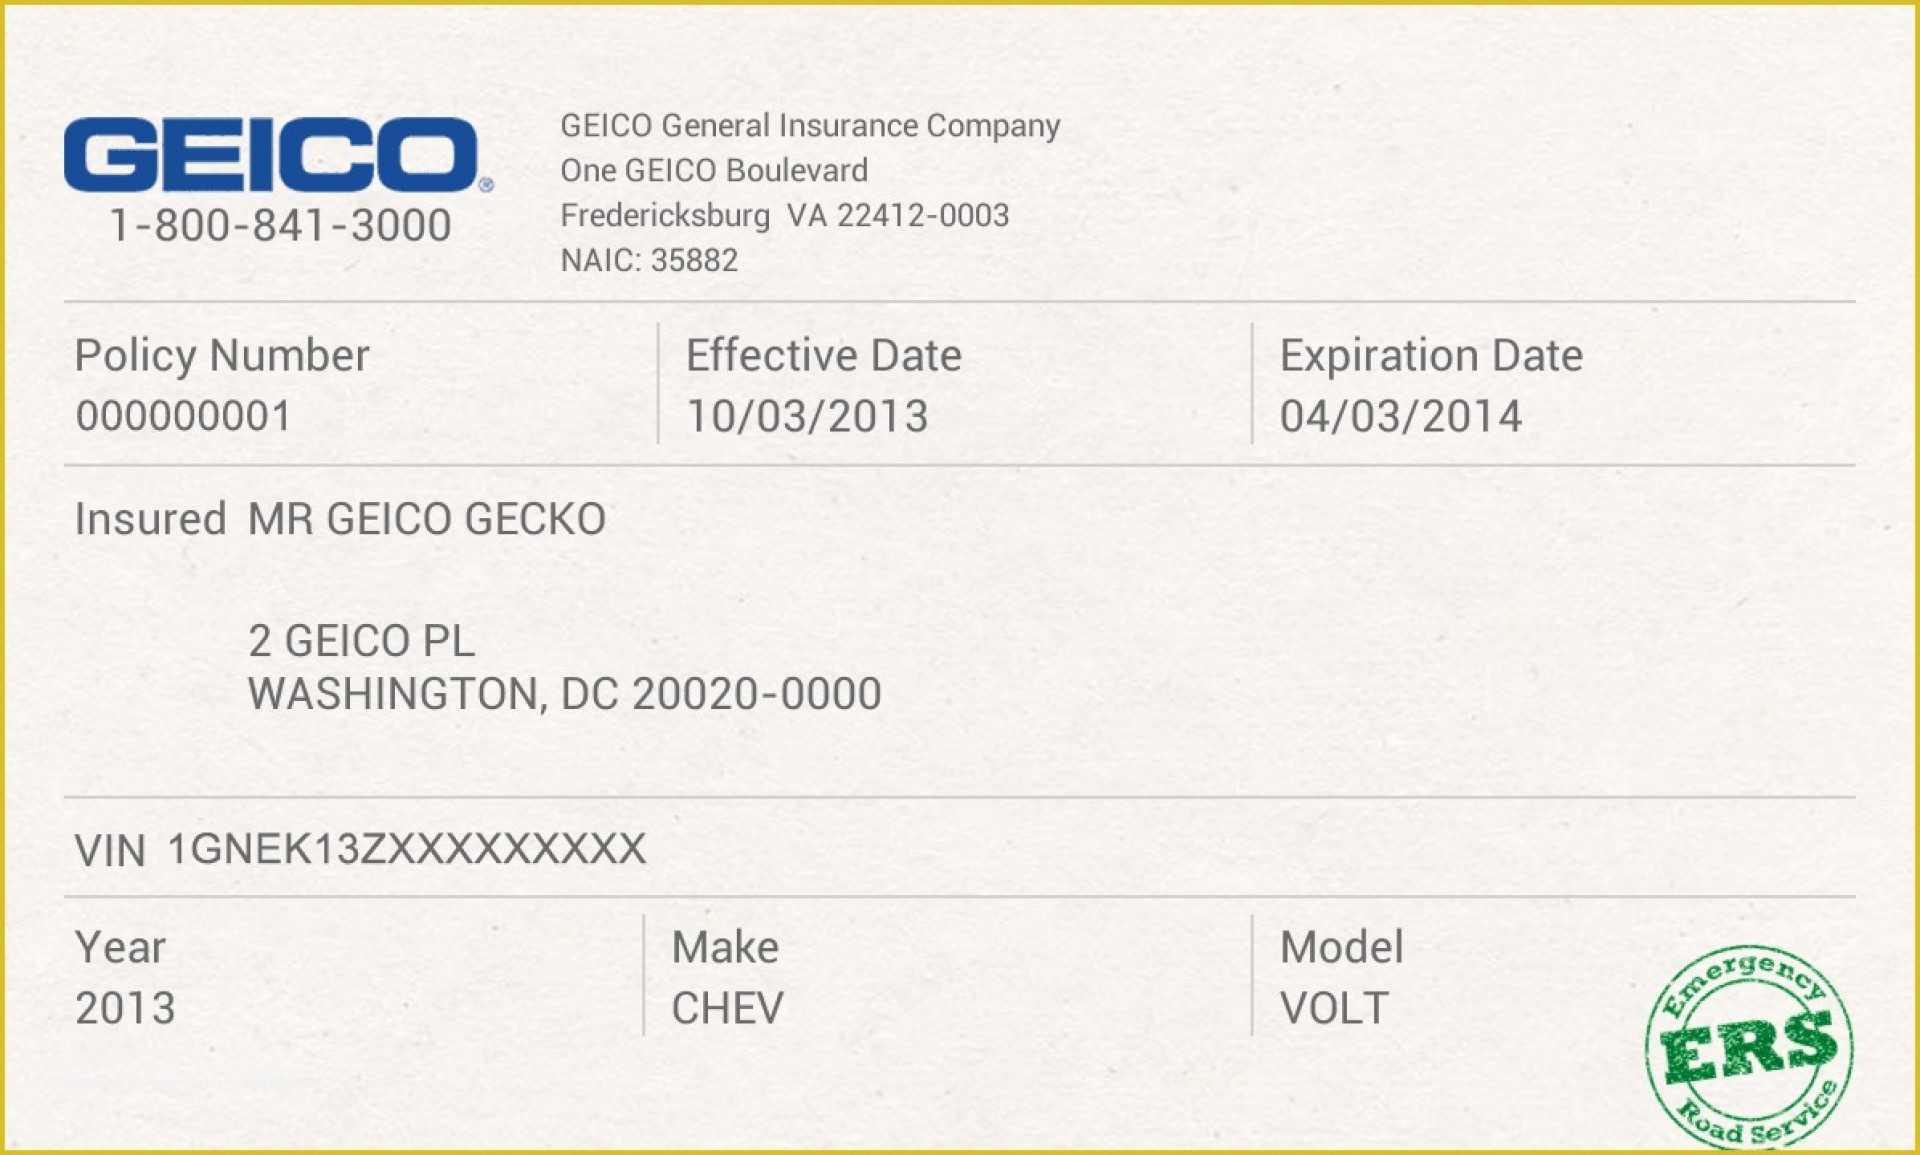 012 Company Car Policy Template Free Auto Insurance Id Card Pertaining To Car Insurance Card Template Download